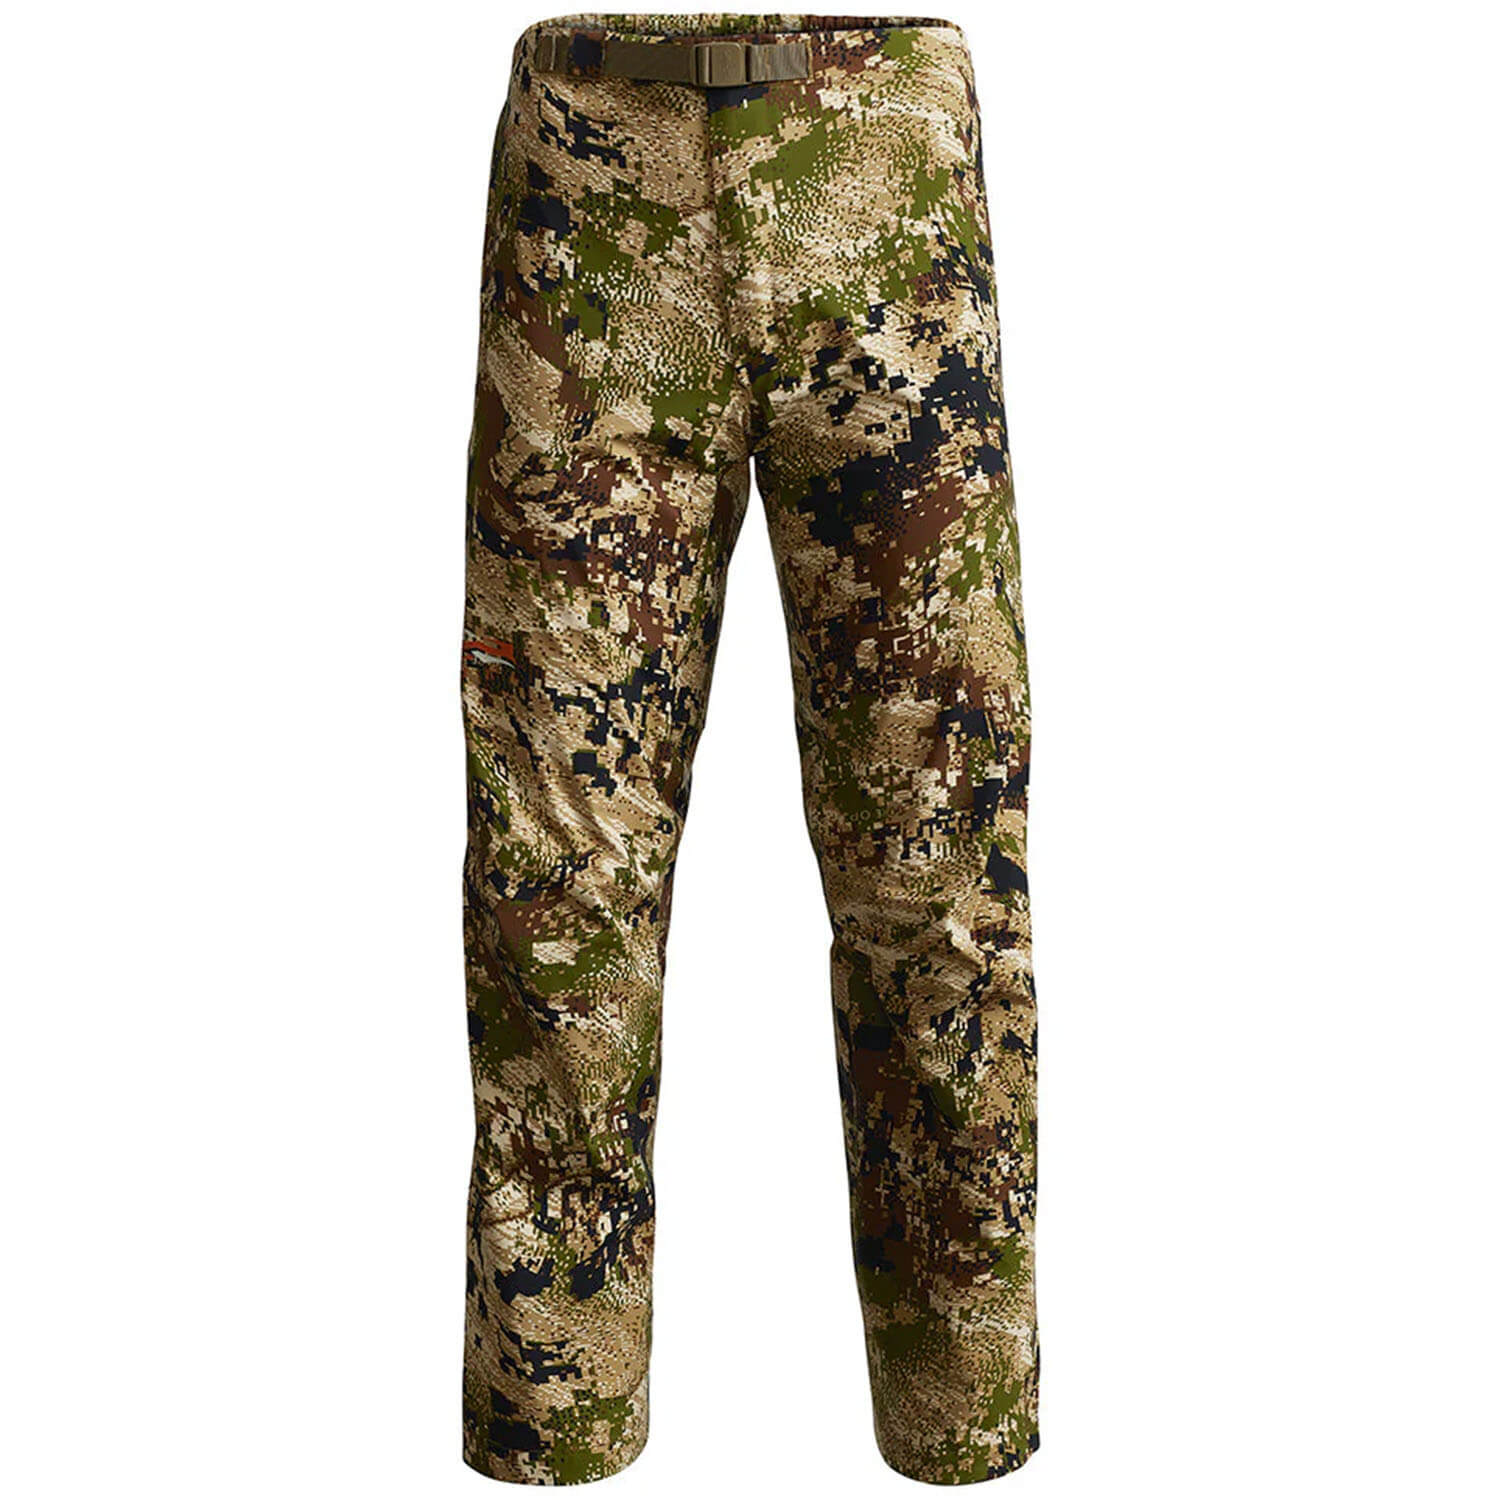 Sitka Gear Rain Trousers Dew Point (Optifade Subalpine) - Camouflage Clothing